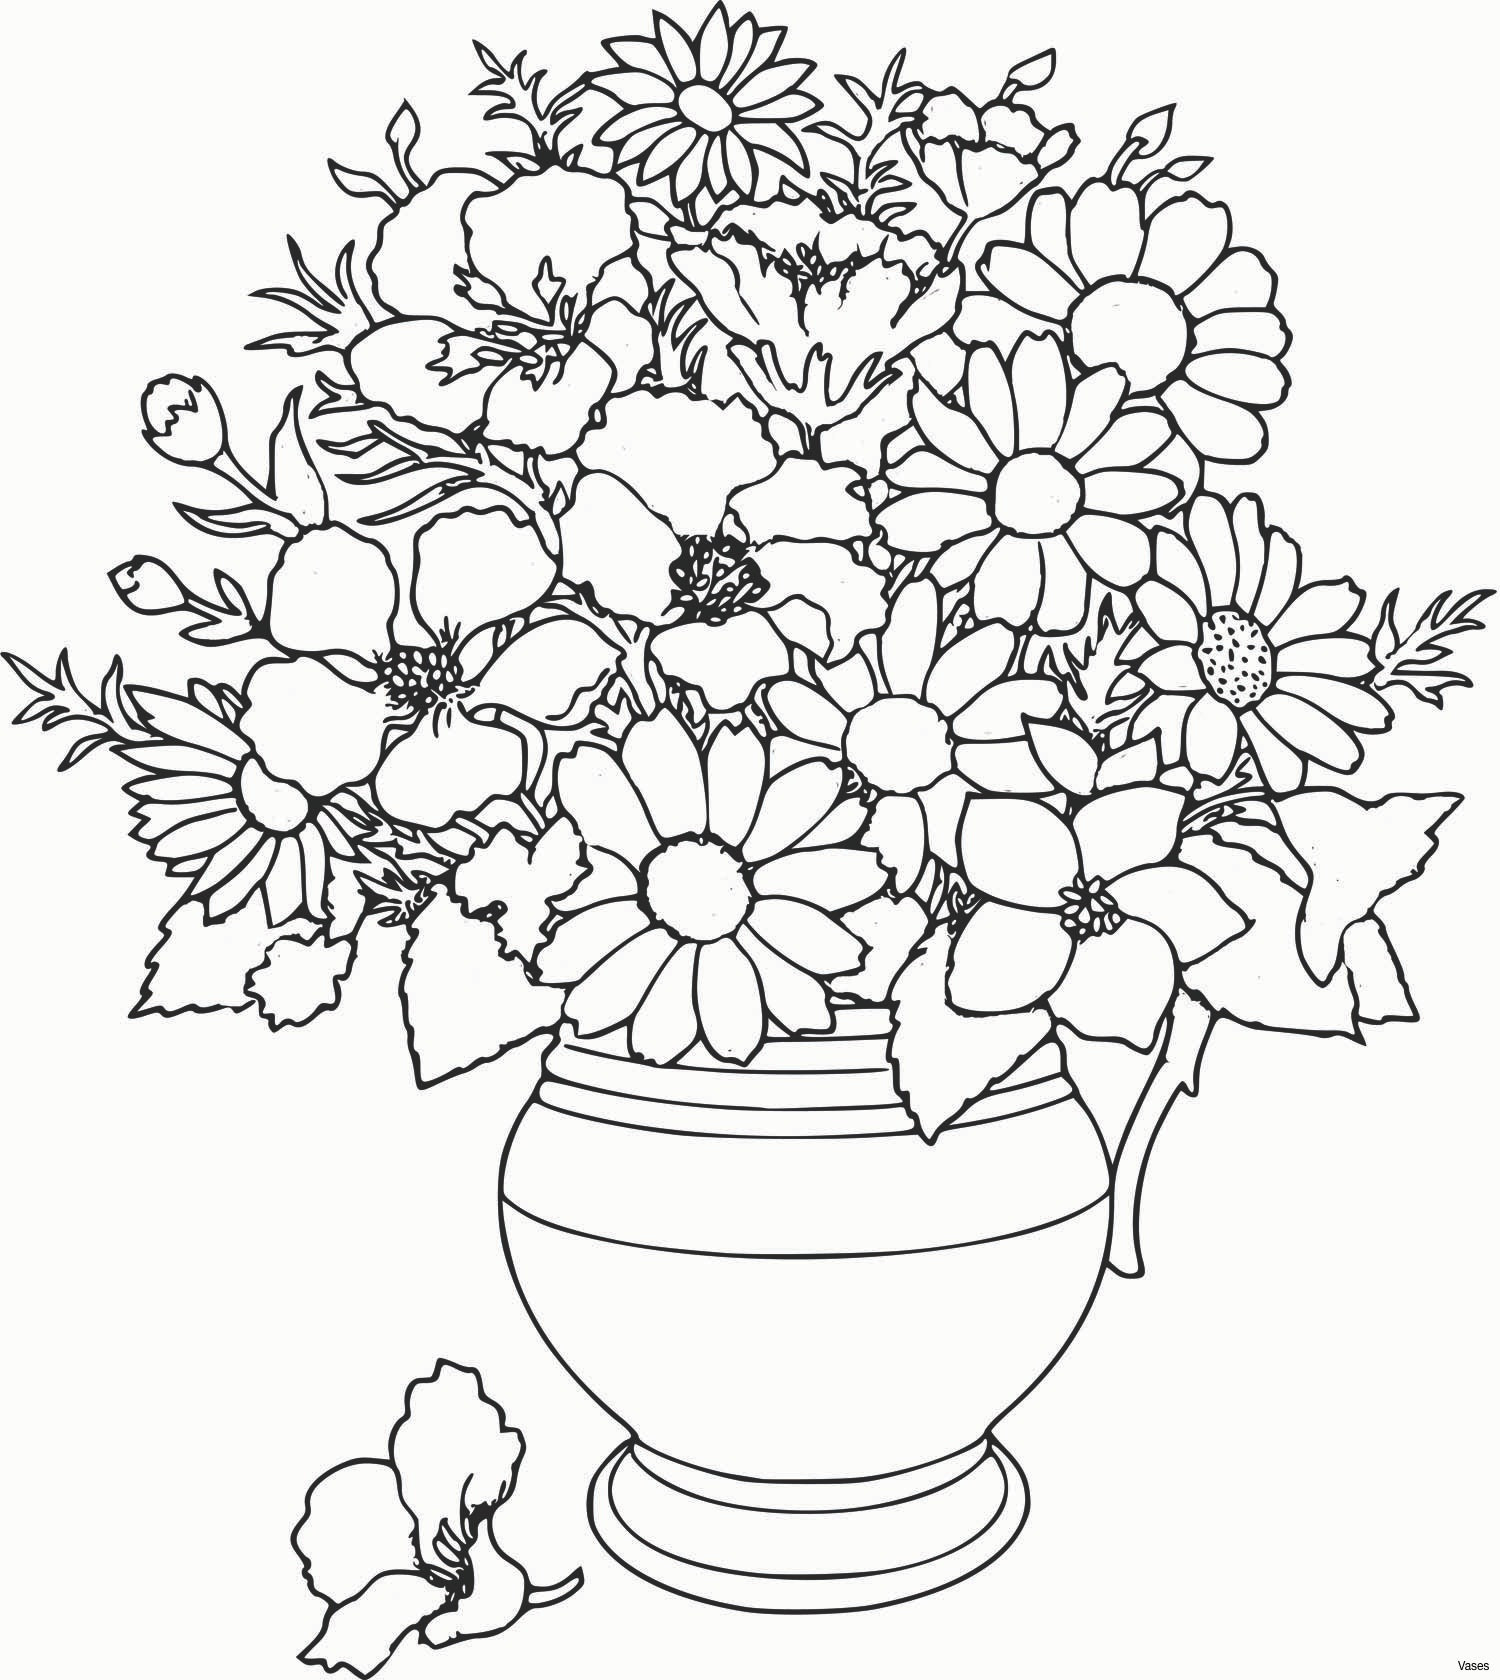 28 Fabulous Vase for 100 Roses 2024 free download vase for 100 roses of rose flower coloring pages fun time with regard to rose flower coloring pages coloring pages roses new vases flower vase coloring page pages flowers